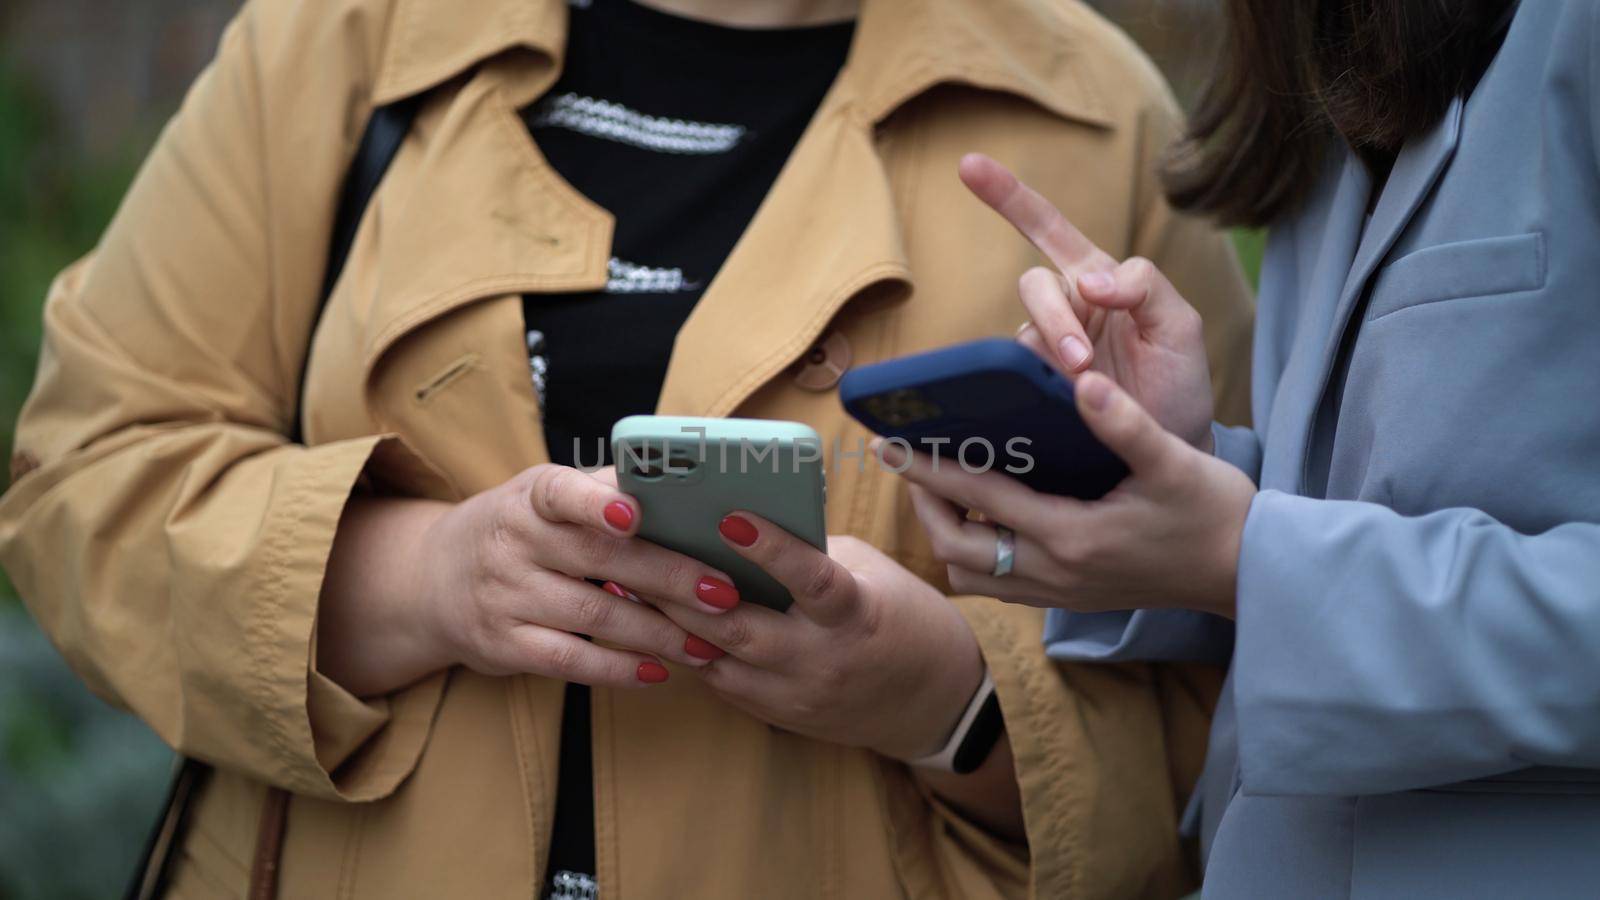 Women's hands hold smartphones. Women communicate and use phones by Petrokill